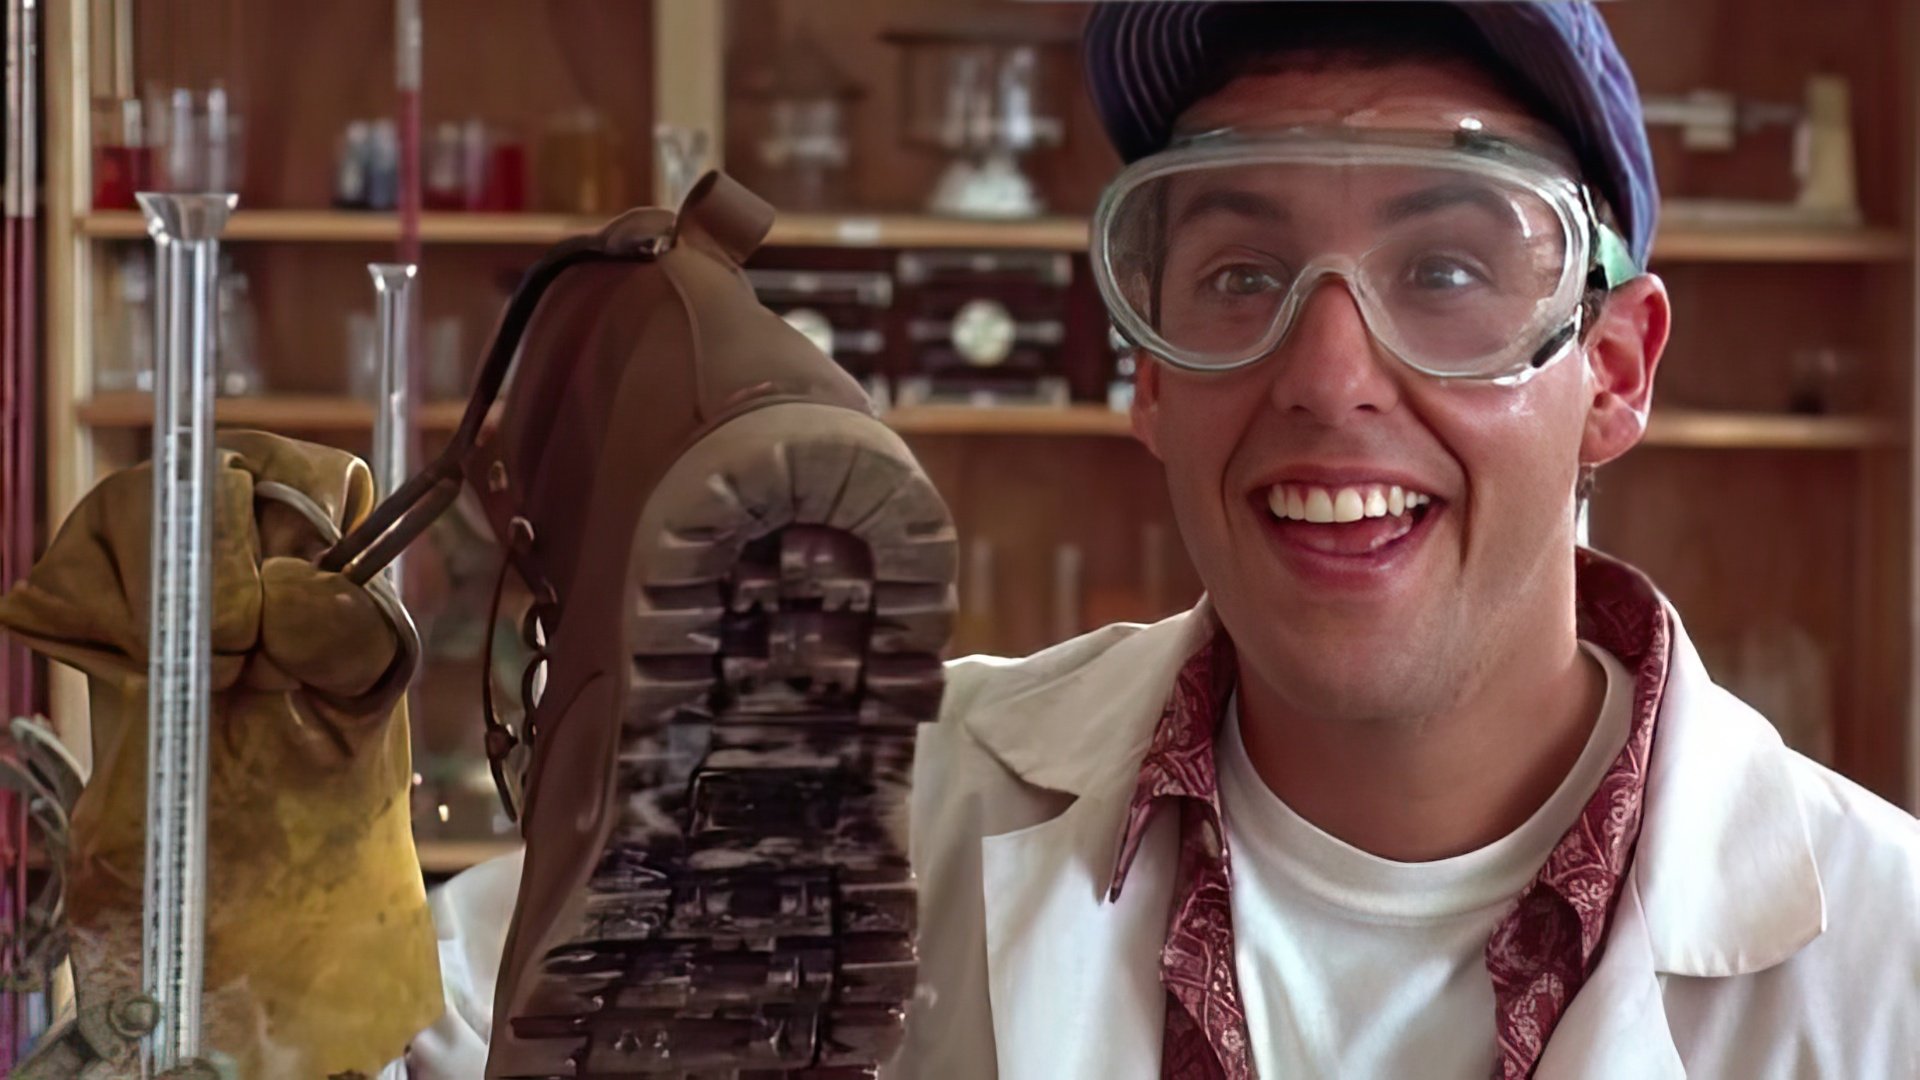 Adam Sandler’s characters irritate you – this is his acting style